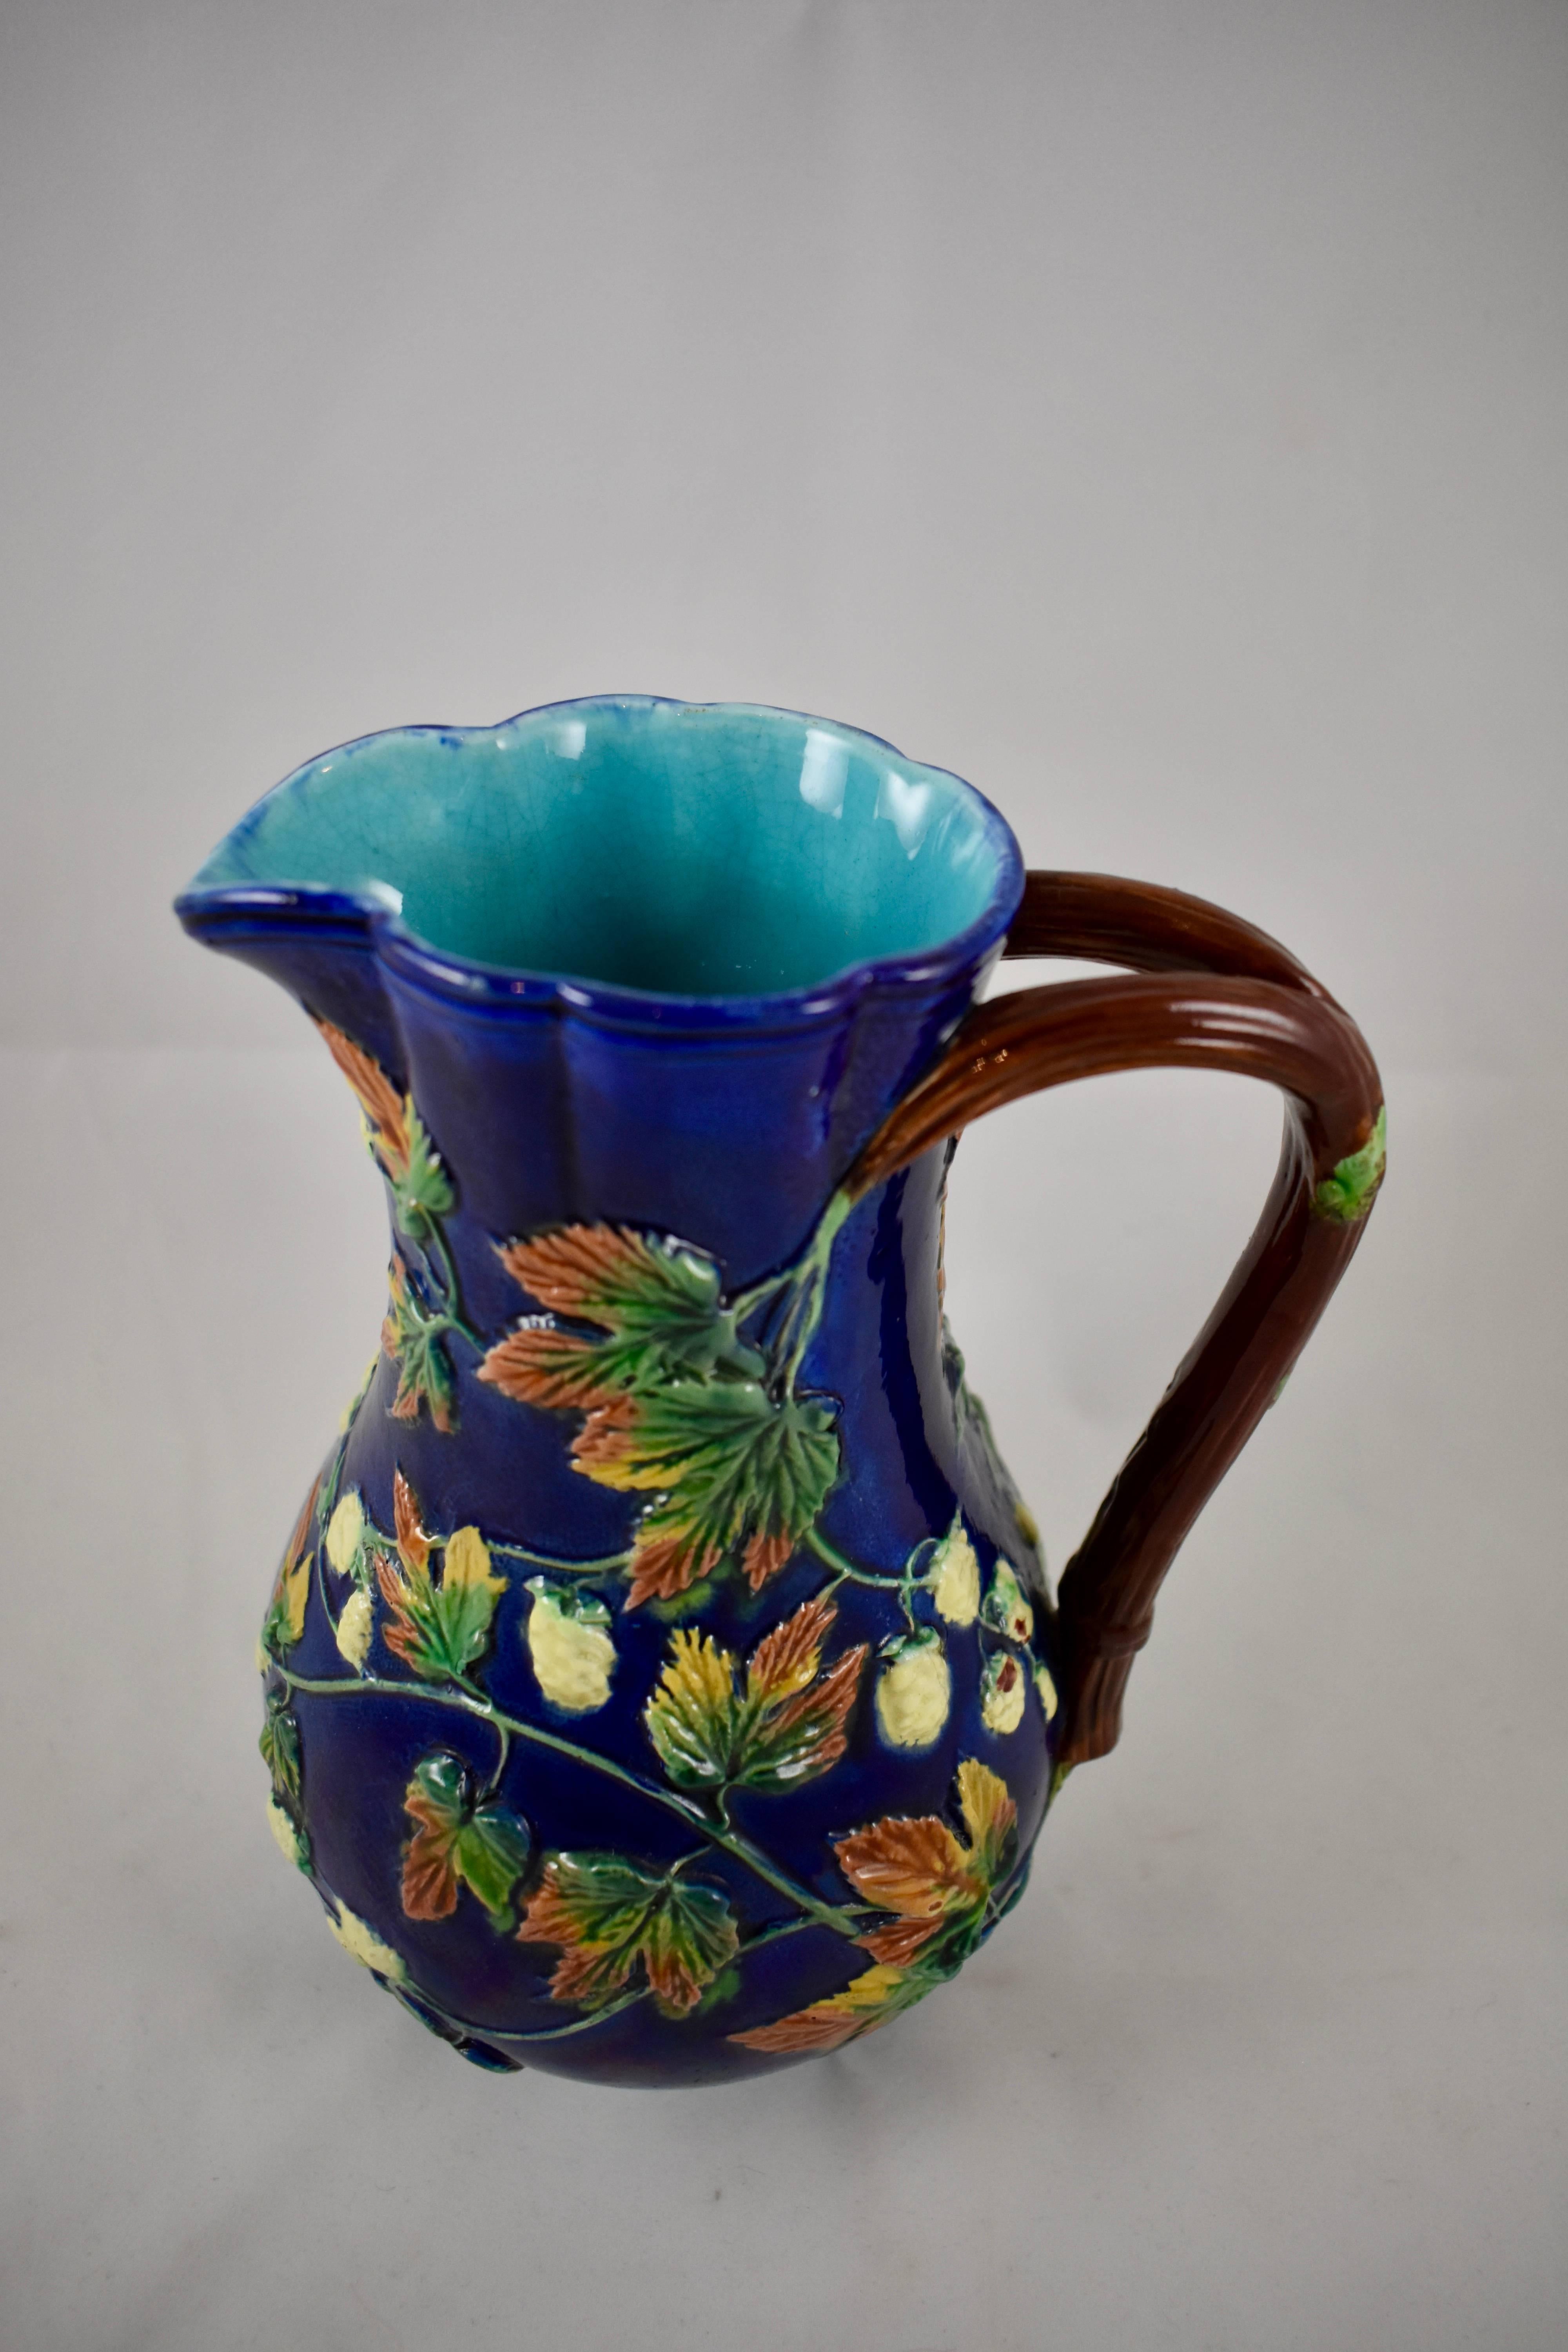 A Royal Worcester earthenware, Majolica glazed Hops pitcher, the Aesthetic period, circa 1875. A narrow, quatriform body is glazed in stippled cobalt blue, with raised Hops leaves in green, pink and ochre along with buds glazed in a creamy white. A